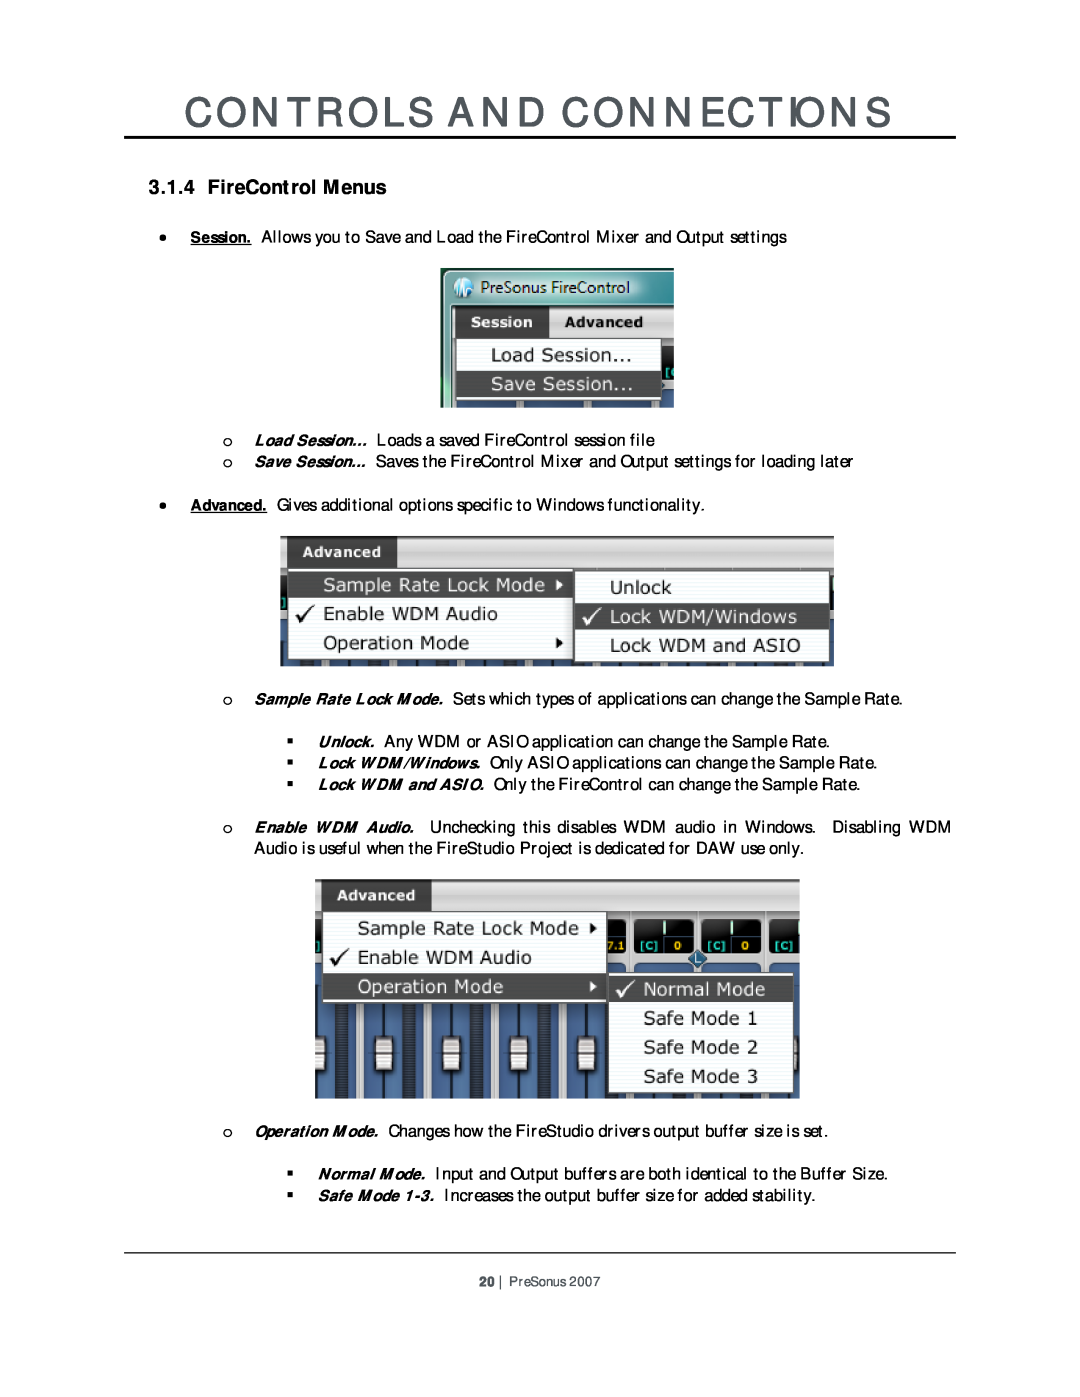 Presonus Audio electronic Microphone Preamplifier user manual FireControl Menus, Controls And Connections, PreSonus 